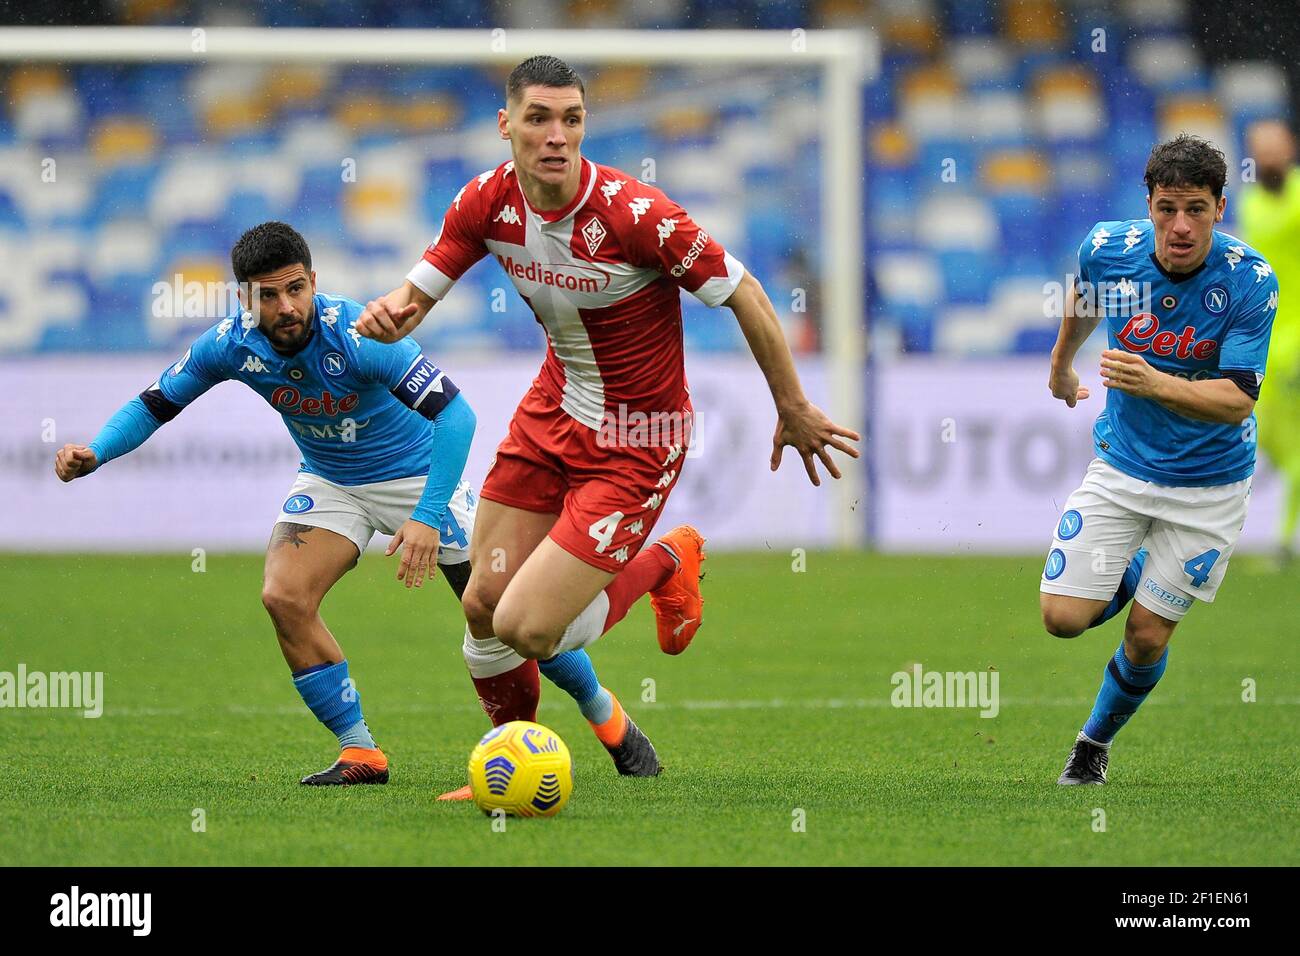 Nikola Milenkovic player of Fiorentina, during the match of the Italian football league Serie A between Napoli vs Fiorentina final result 5-0, match p Stock Photo